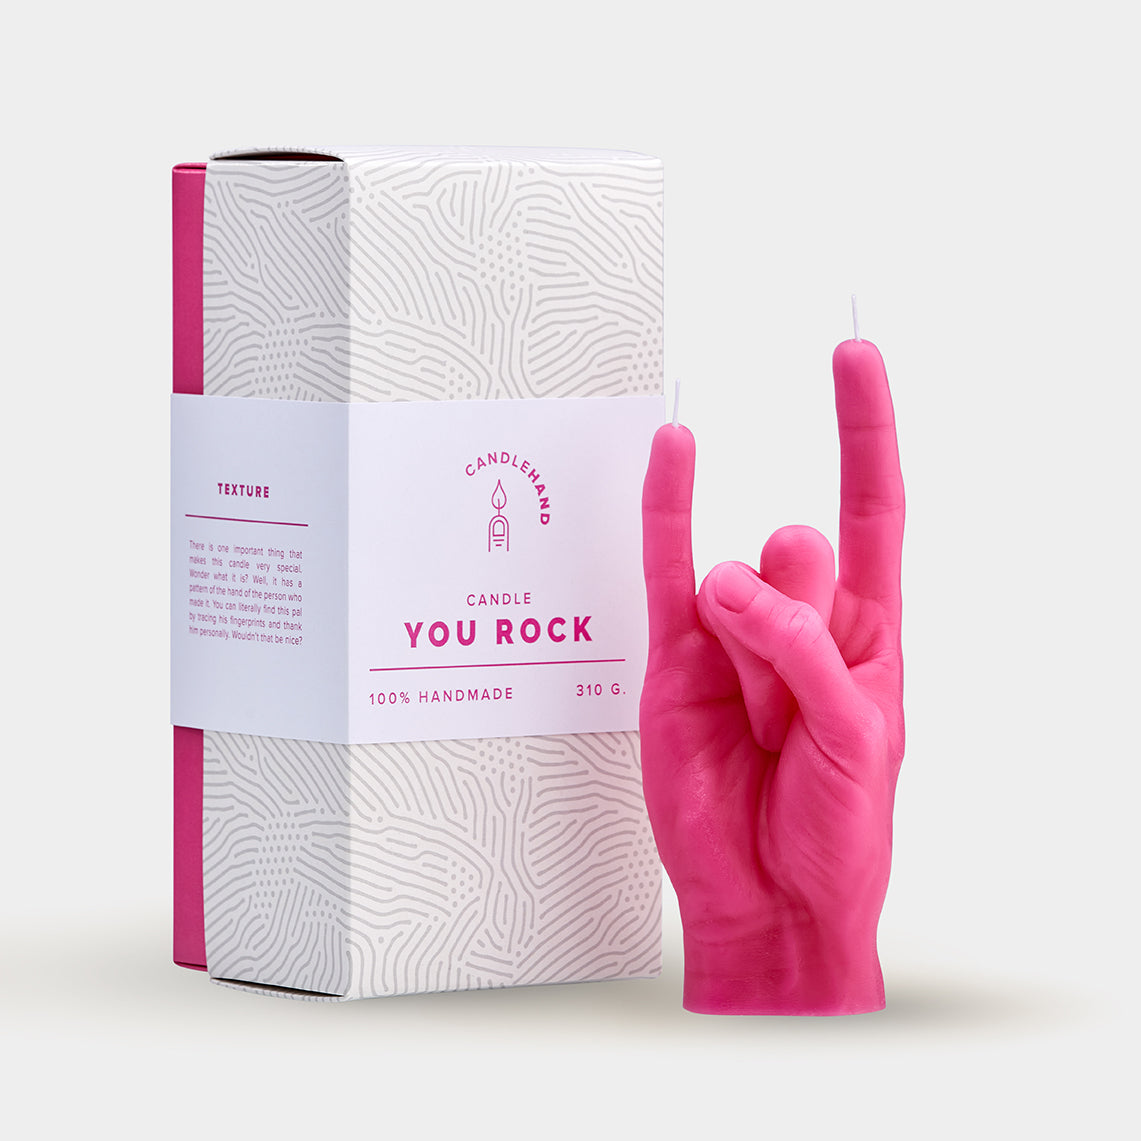 "You Rock" Hand Gesture Candle